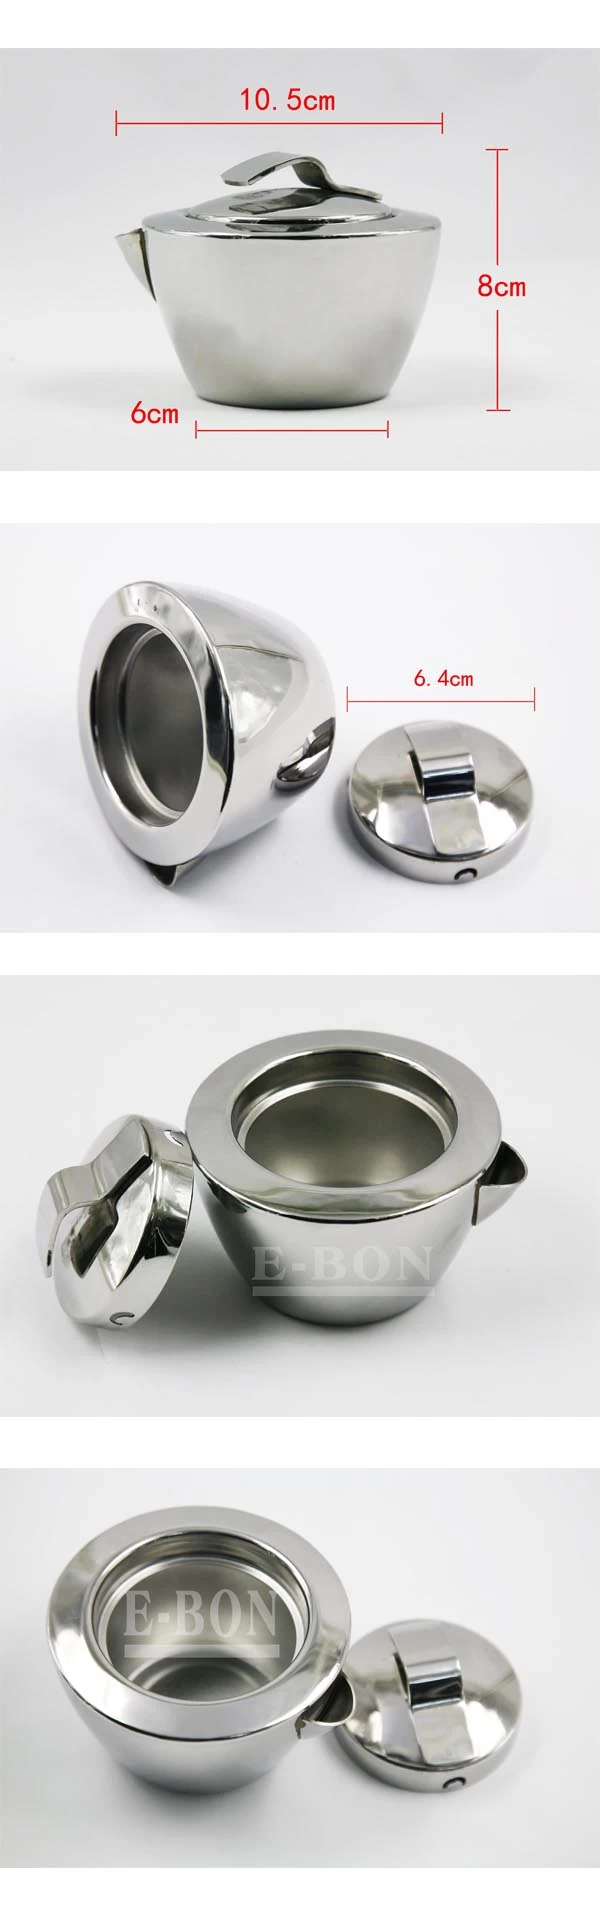 Stainless steel Sauce boat with lid